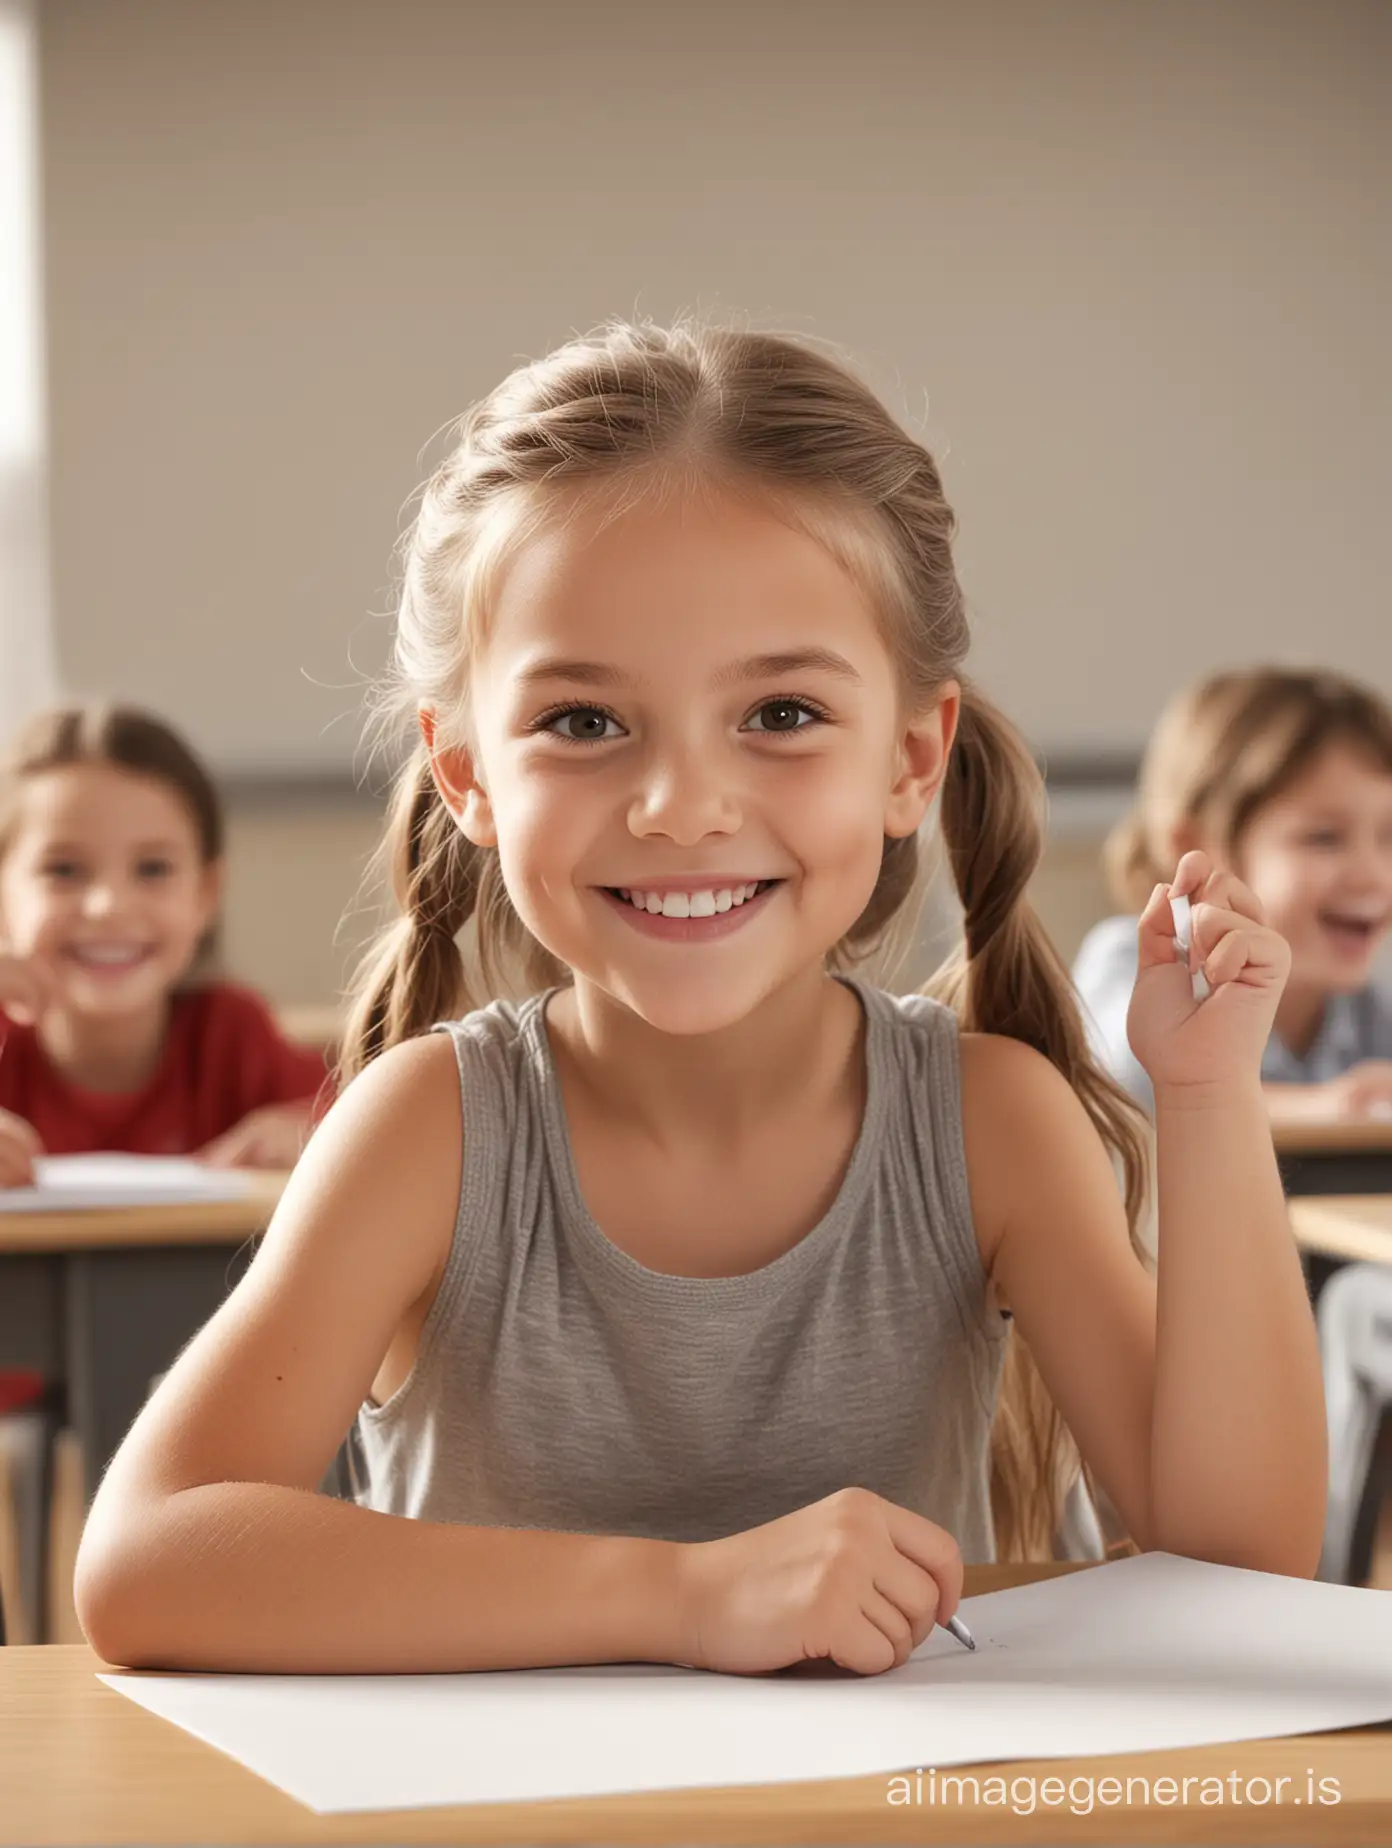 Smiling-Little-Girl-Holding-White-Paper-in-Classroom